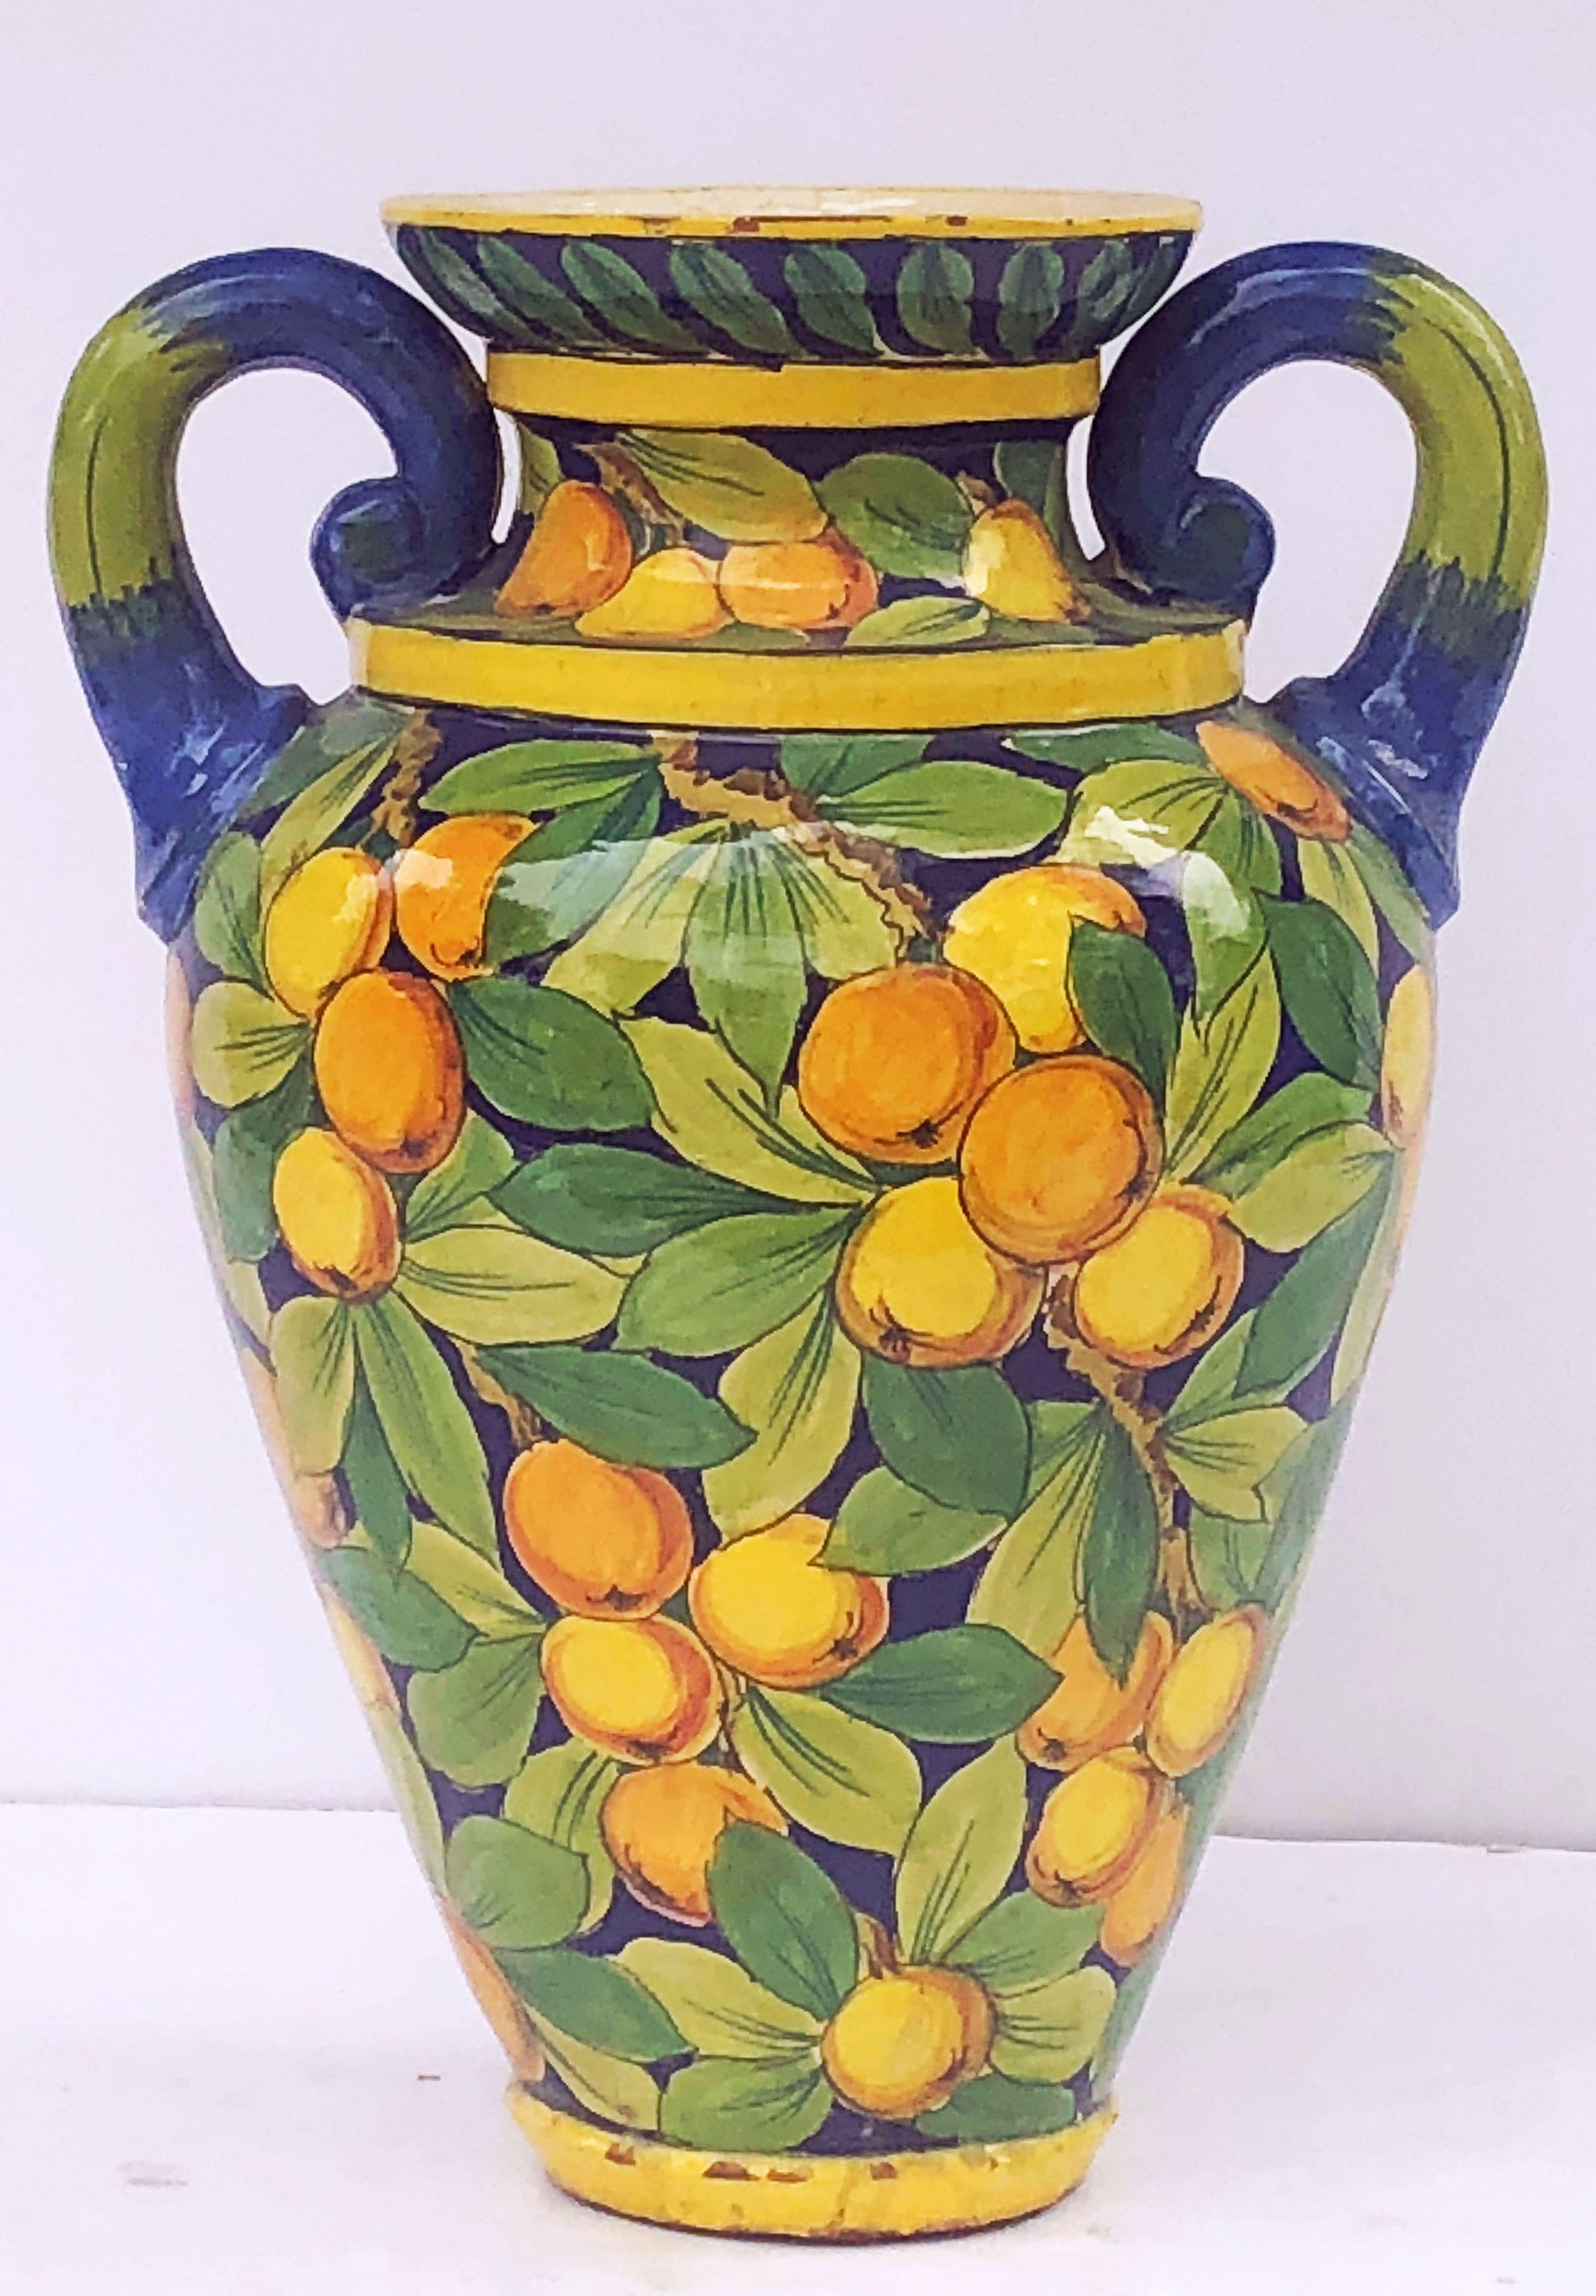 A fine large Italian majolica vase featuring a classic two handled body with a design of lemons and oranges and gold yellow and blue accents.

    